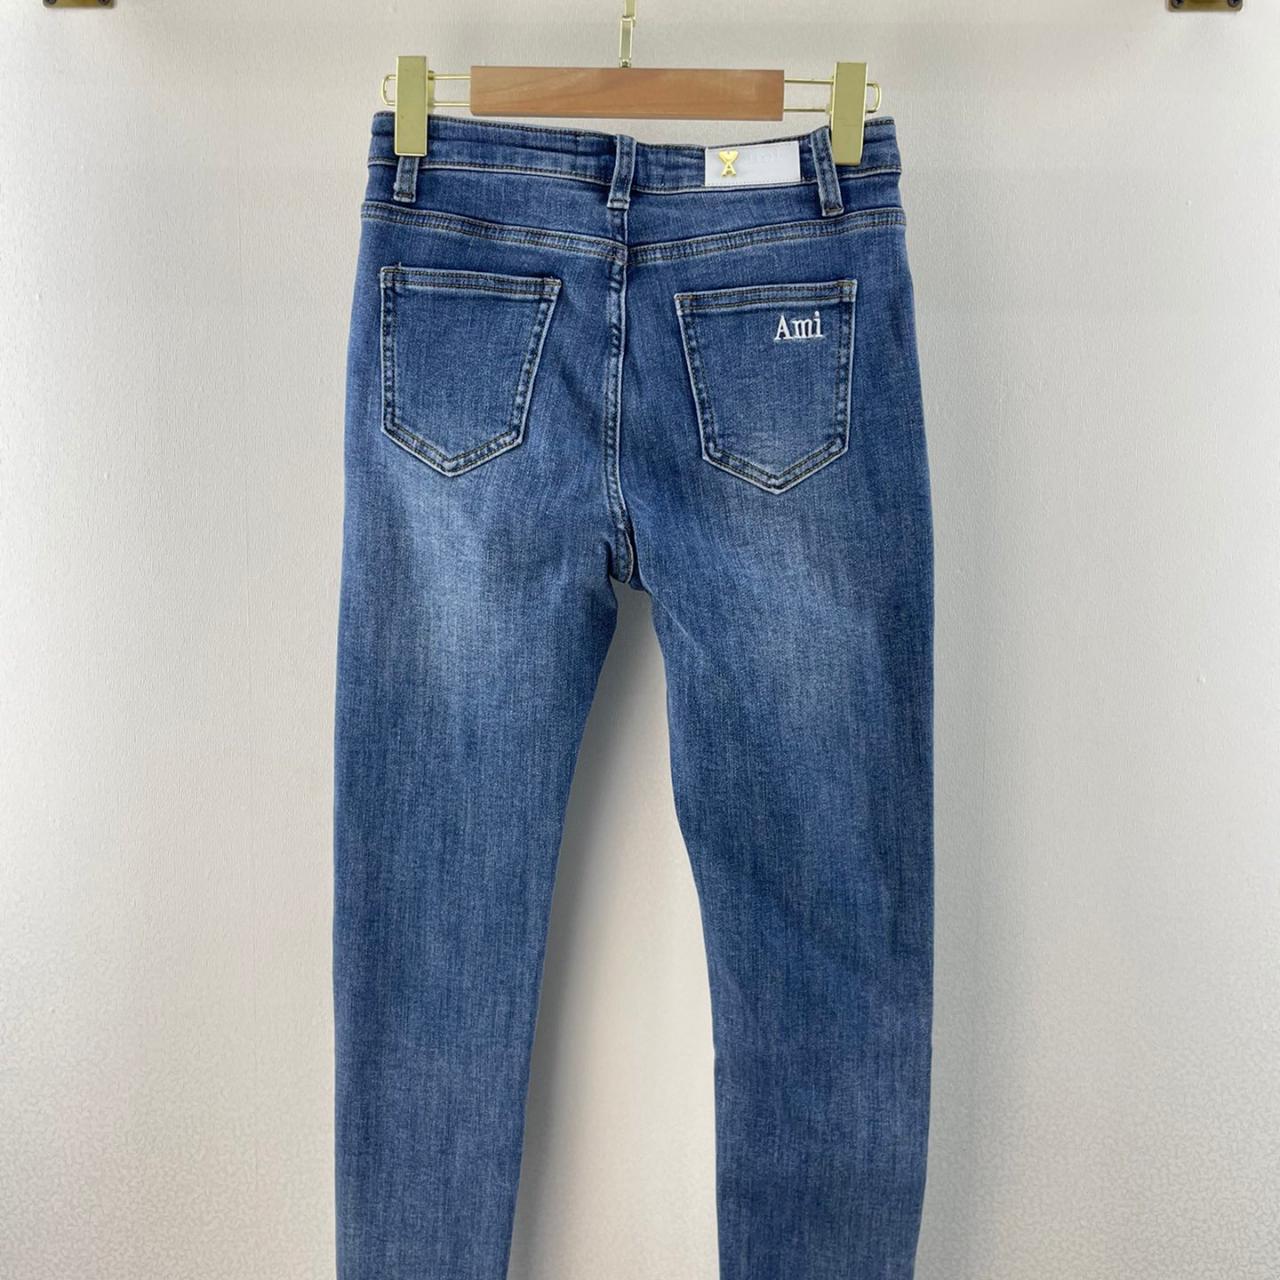 Ami new Jeans for men and women. Brand new!!! - Depop